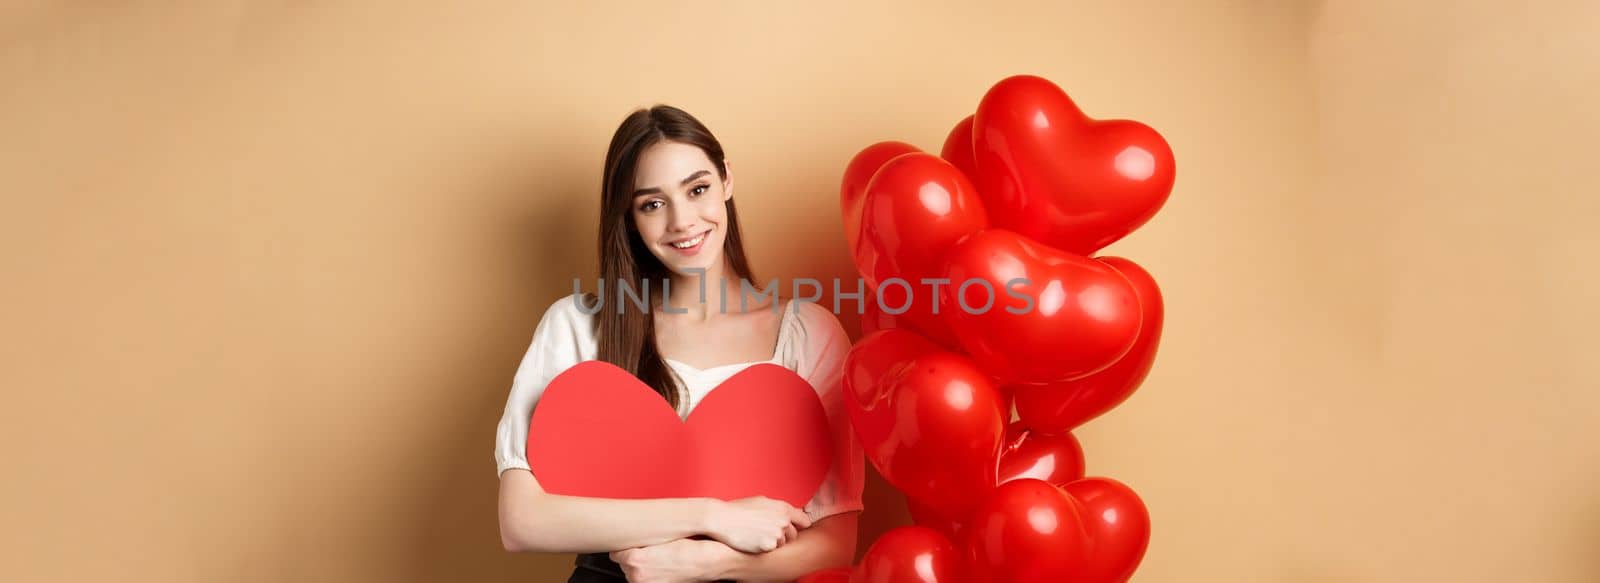 Valentines day and love concept. Lovely girl hugging big romantic heart cutout and smiling, standing near red balloons on beige background by Benzoix